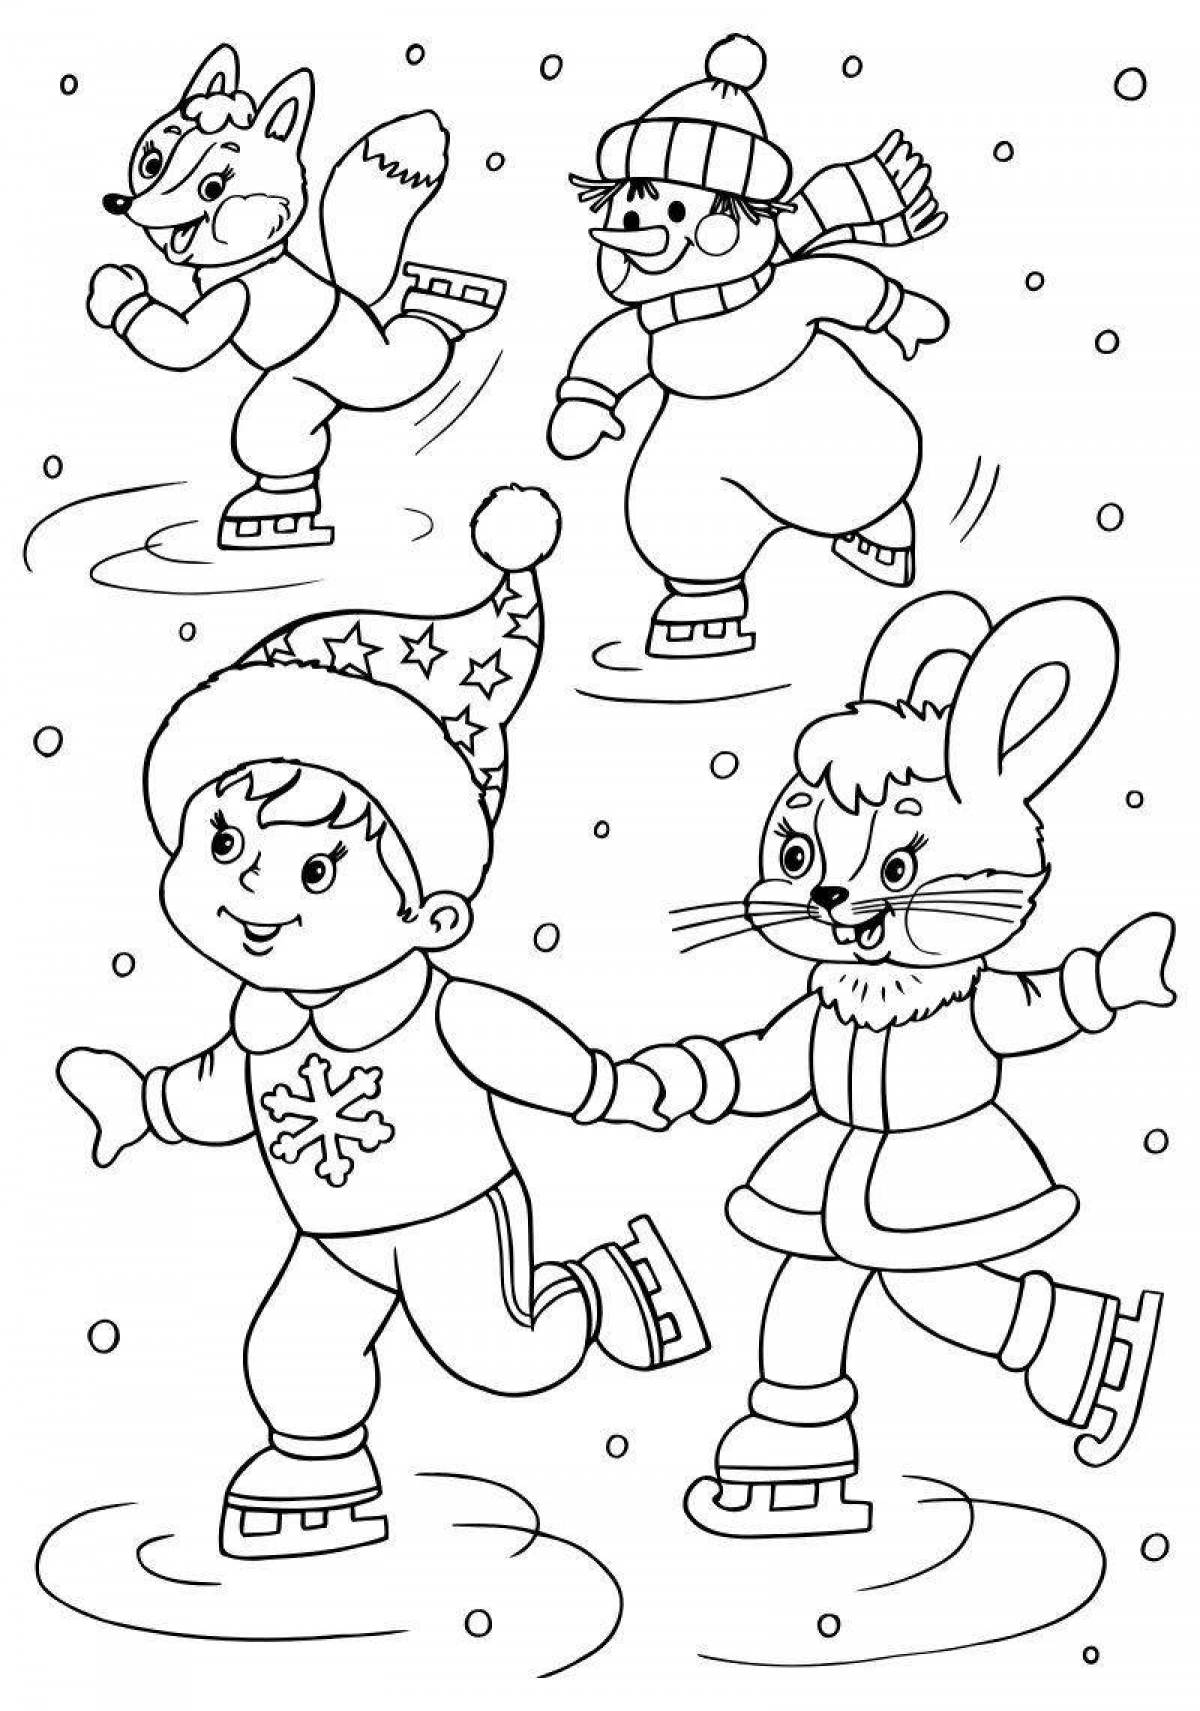 Adorable winter coloring book for kids 6-7 years old